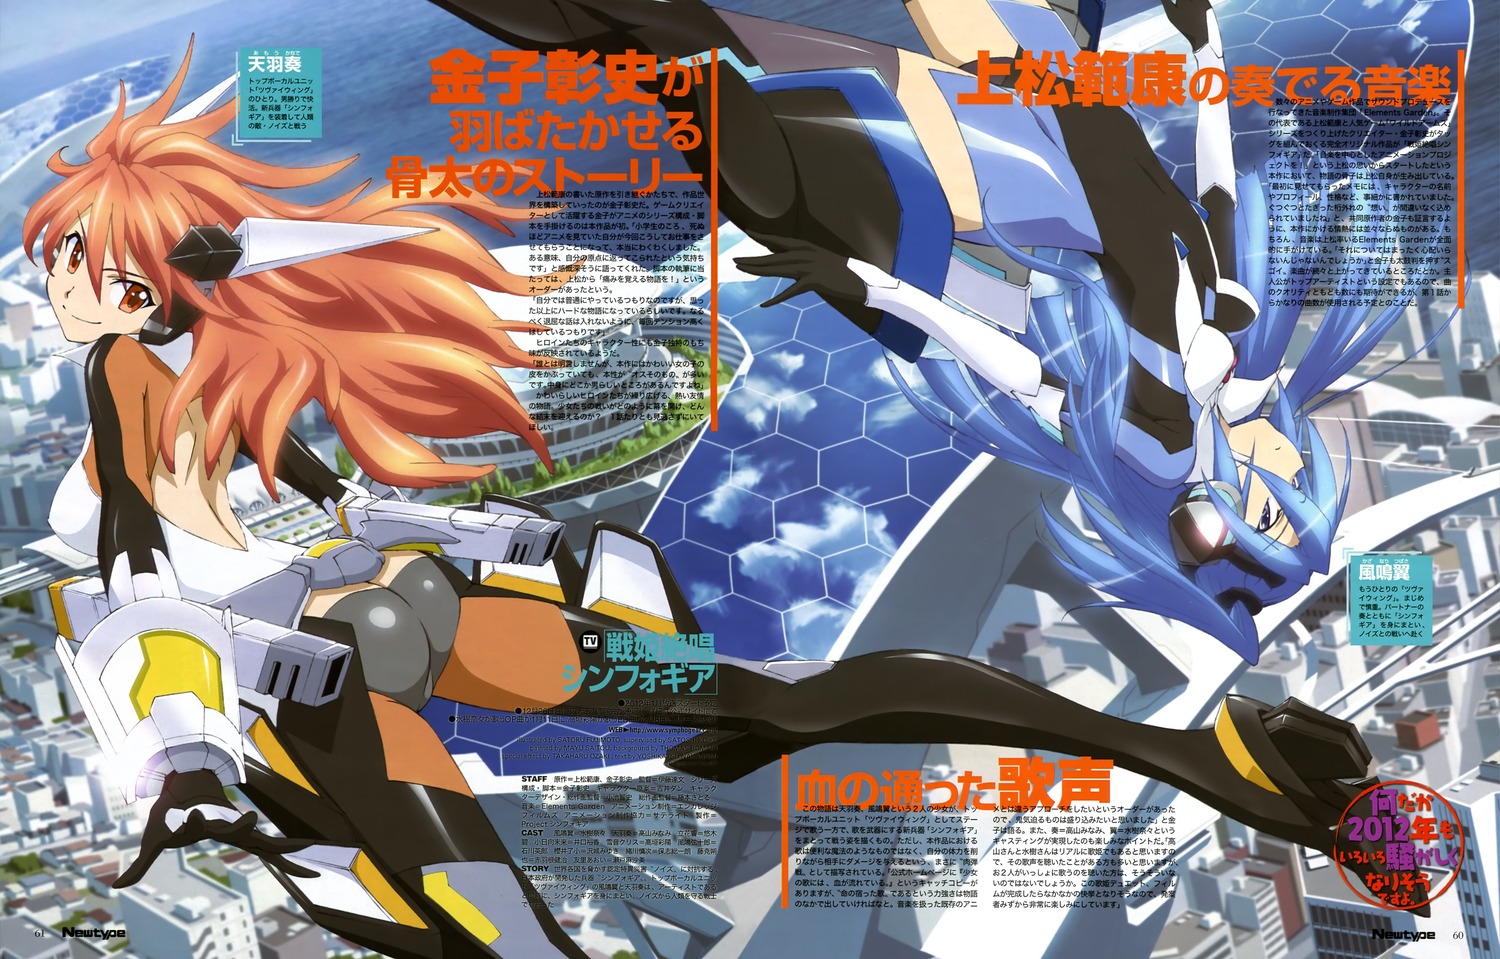 Symphogear is back for Season 3 with Symphogear GX – The Action Pixel